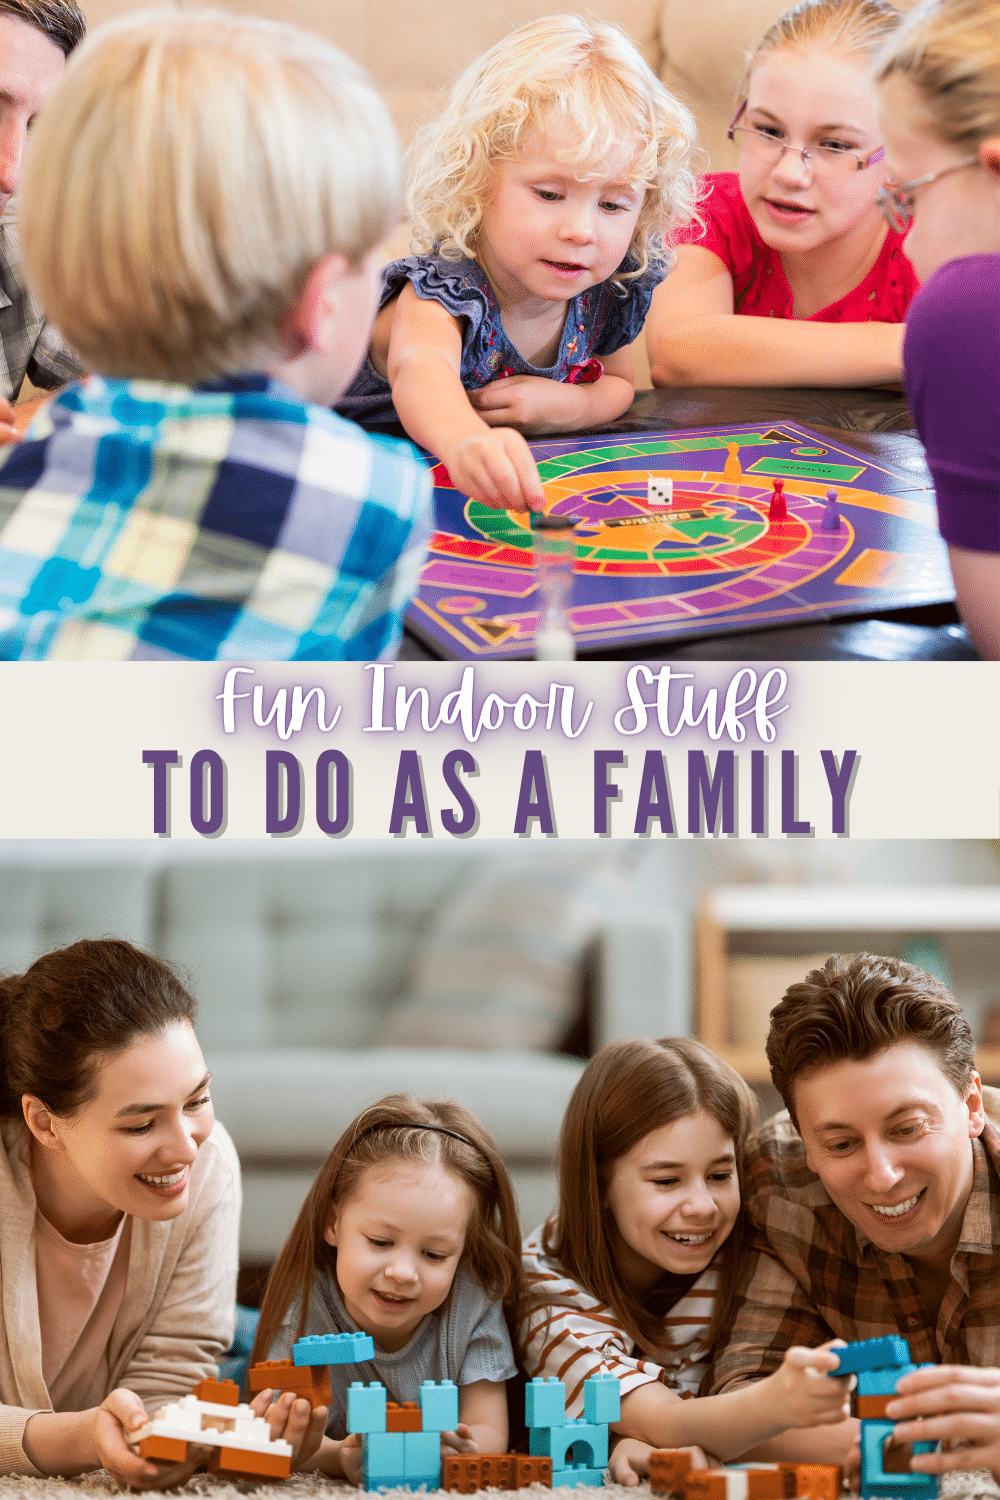 A great idea list of indoor stuff to do as a family that everyone will enjoy! Wonderful ways to create family memories. #familyfun #familytime #indooractivities via @wondermomwannab